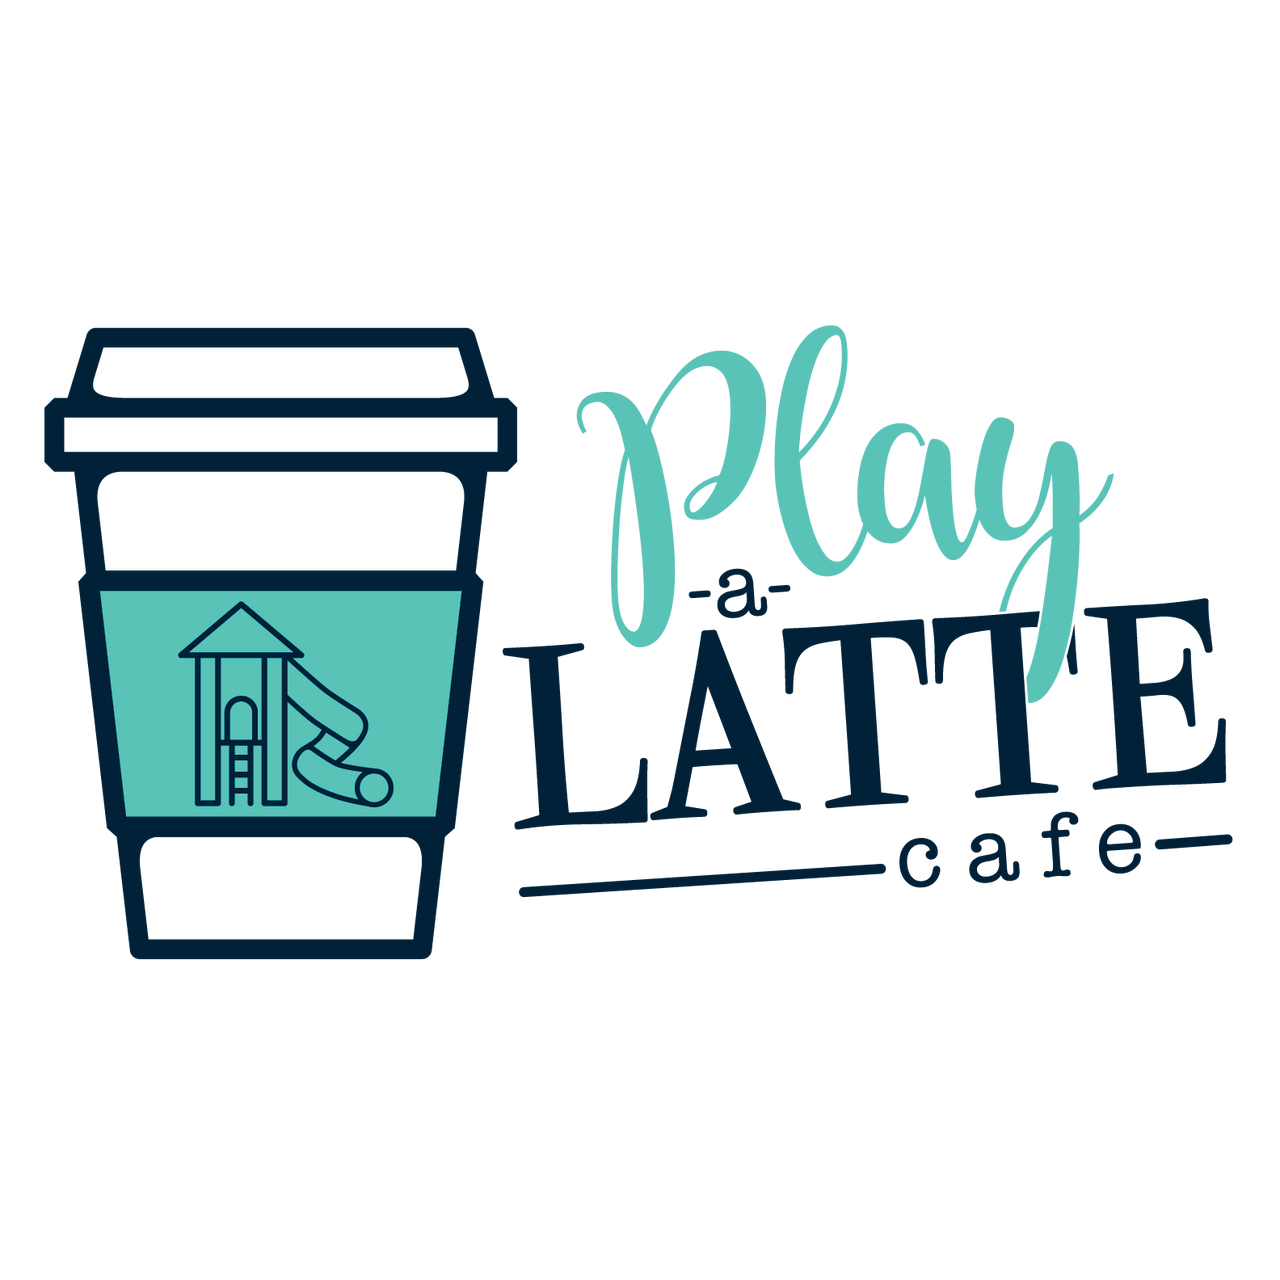 Play-A-Latte Cafe